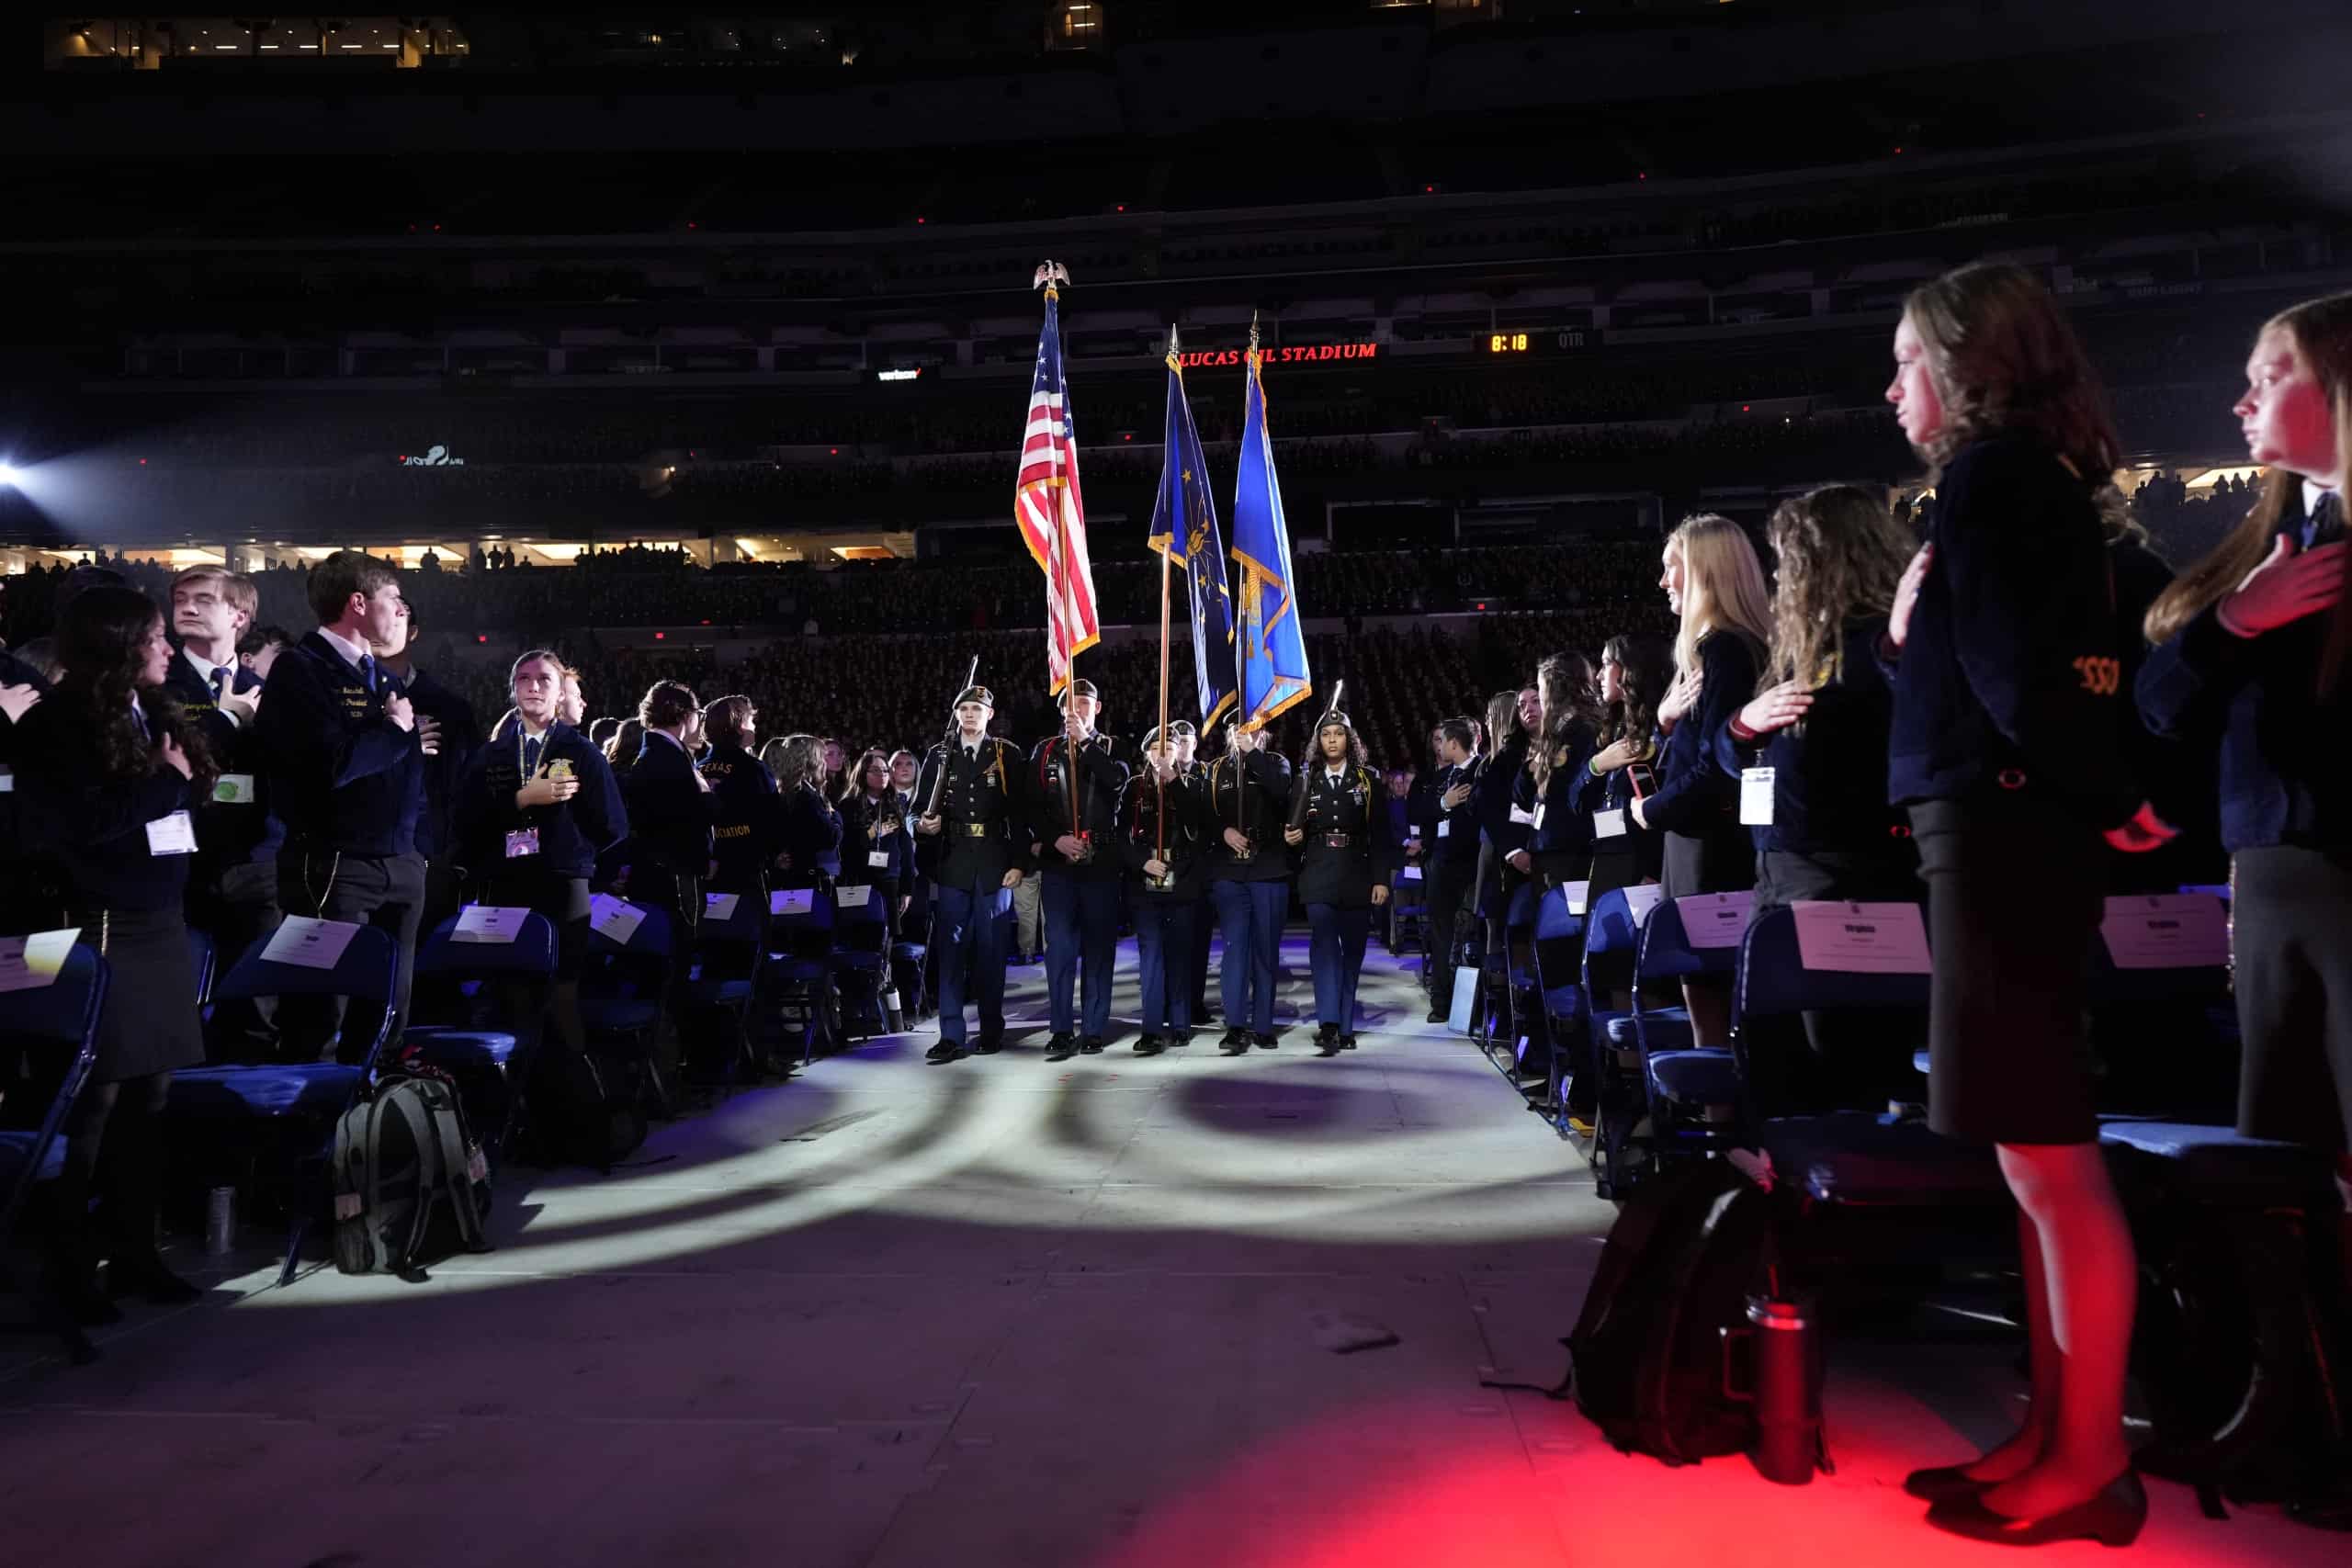 Know Before You Go: National FFA Convention & Expo - National FFA